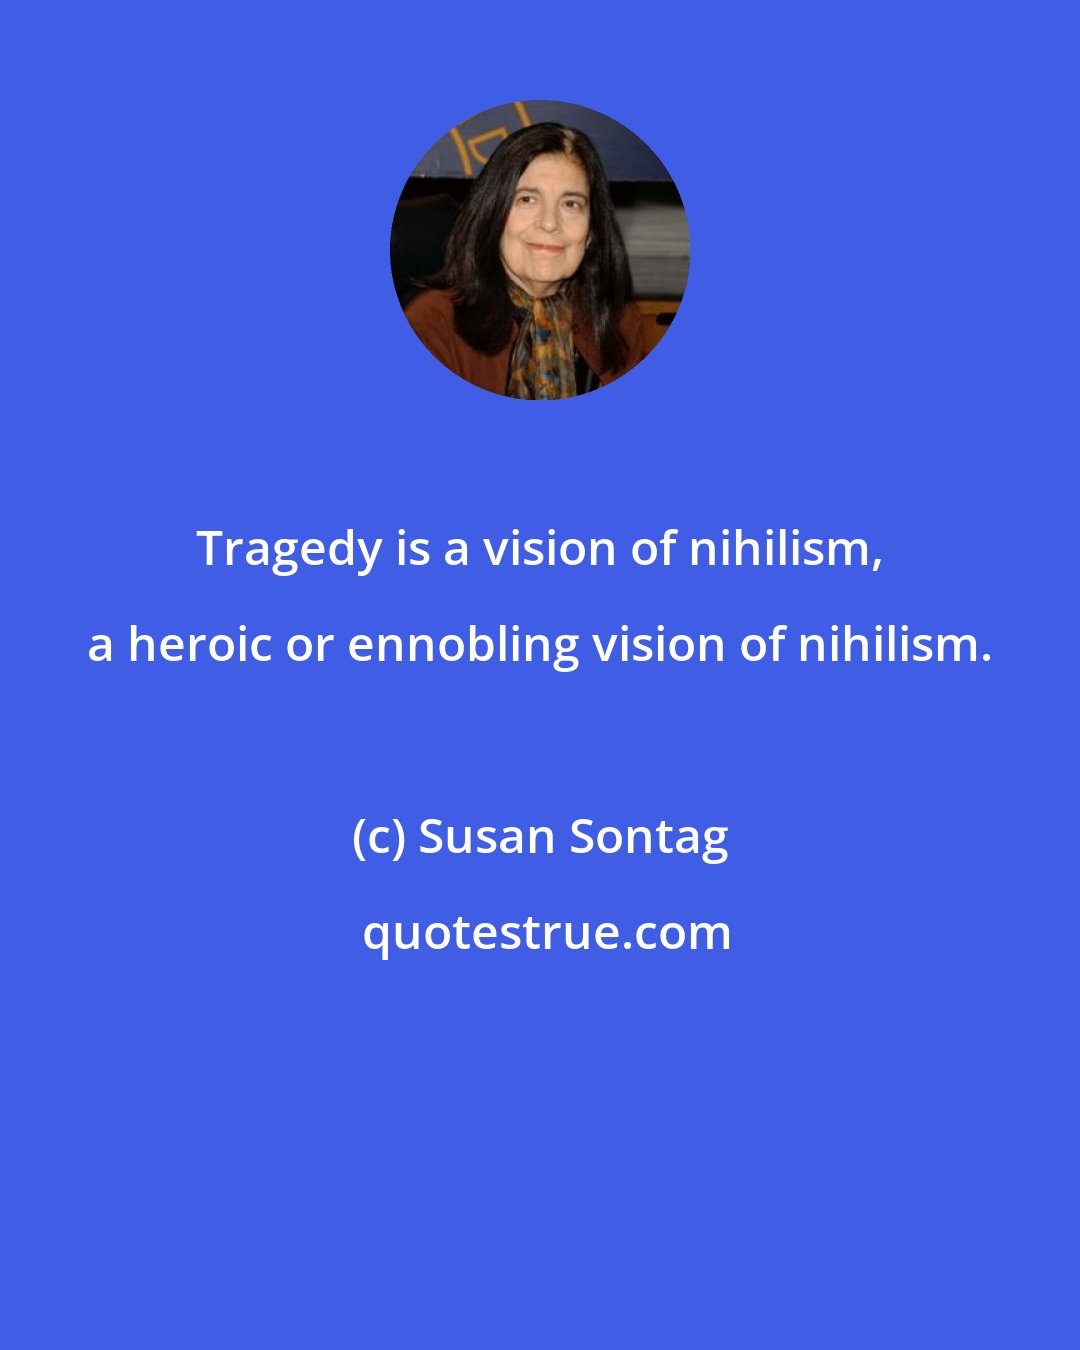 Susan Sontag: Tragedy is a vision of nihilism, a heroic or ennobling vision of nihilism.